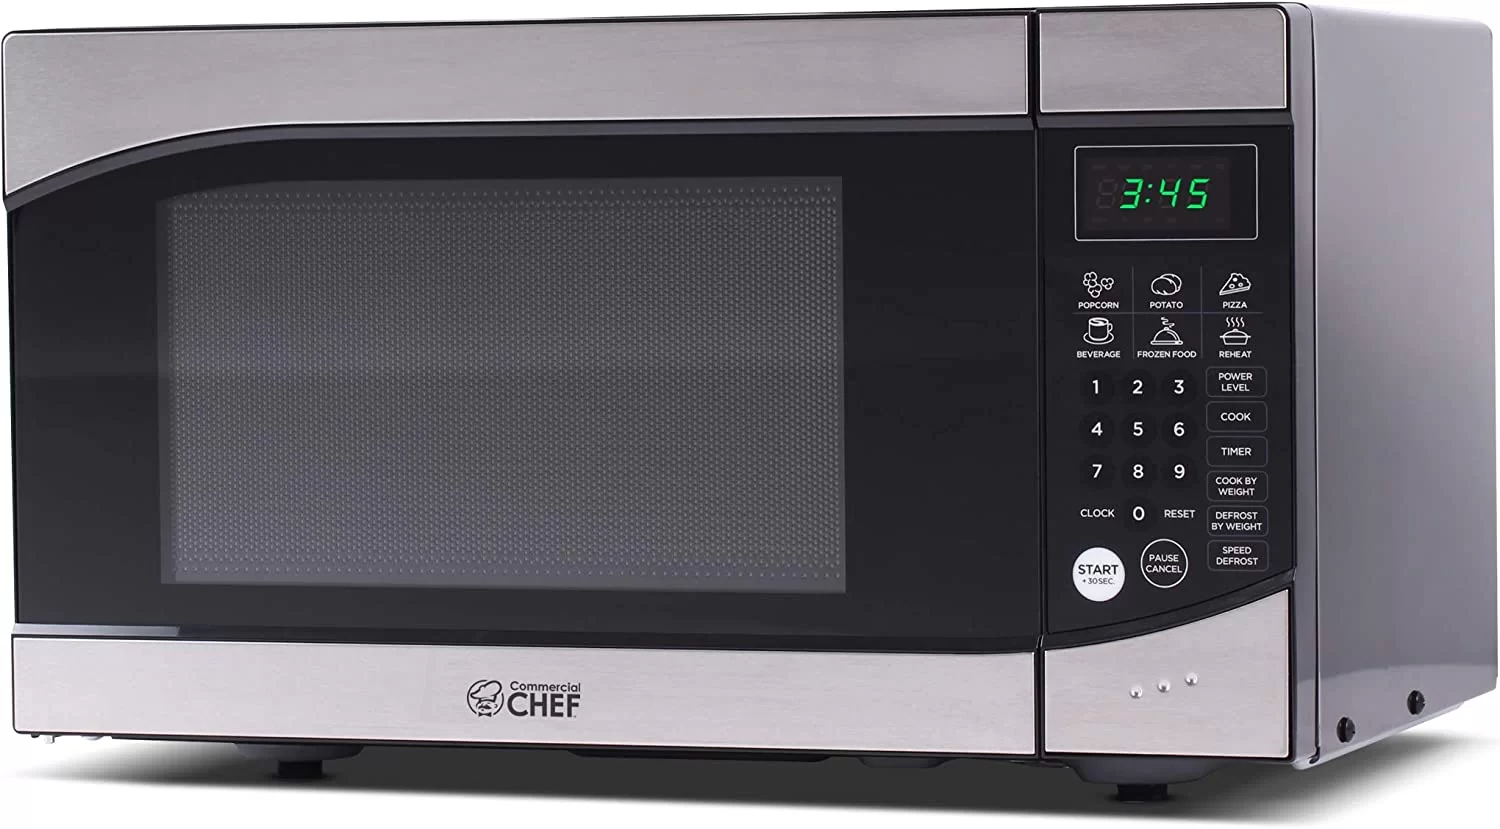 commercial chef chm009 countertop microwave oven 900 watt cubic feet